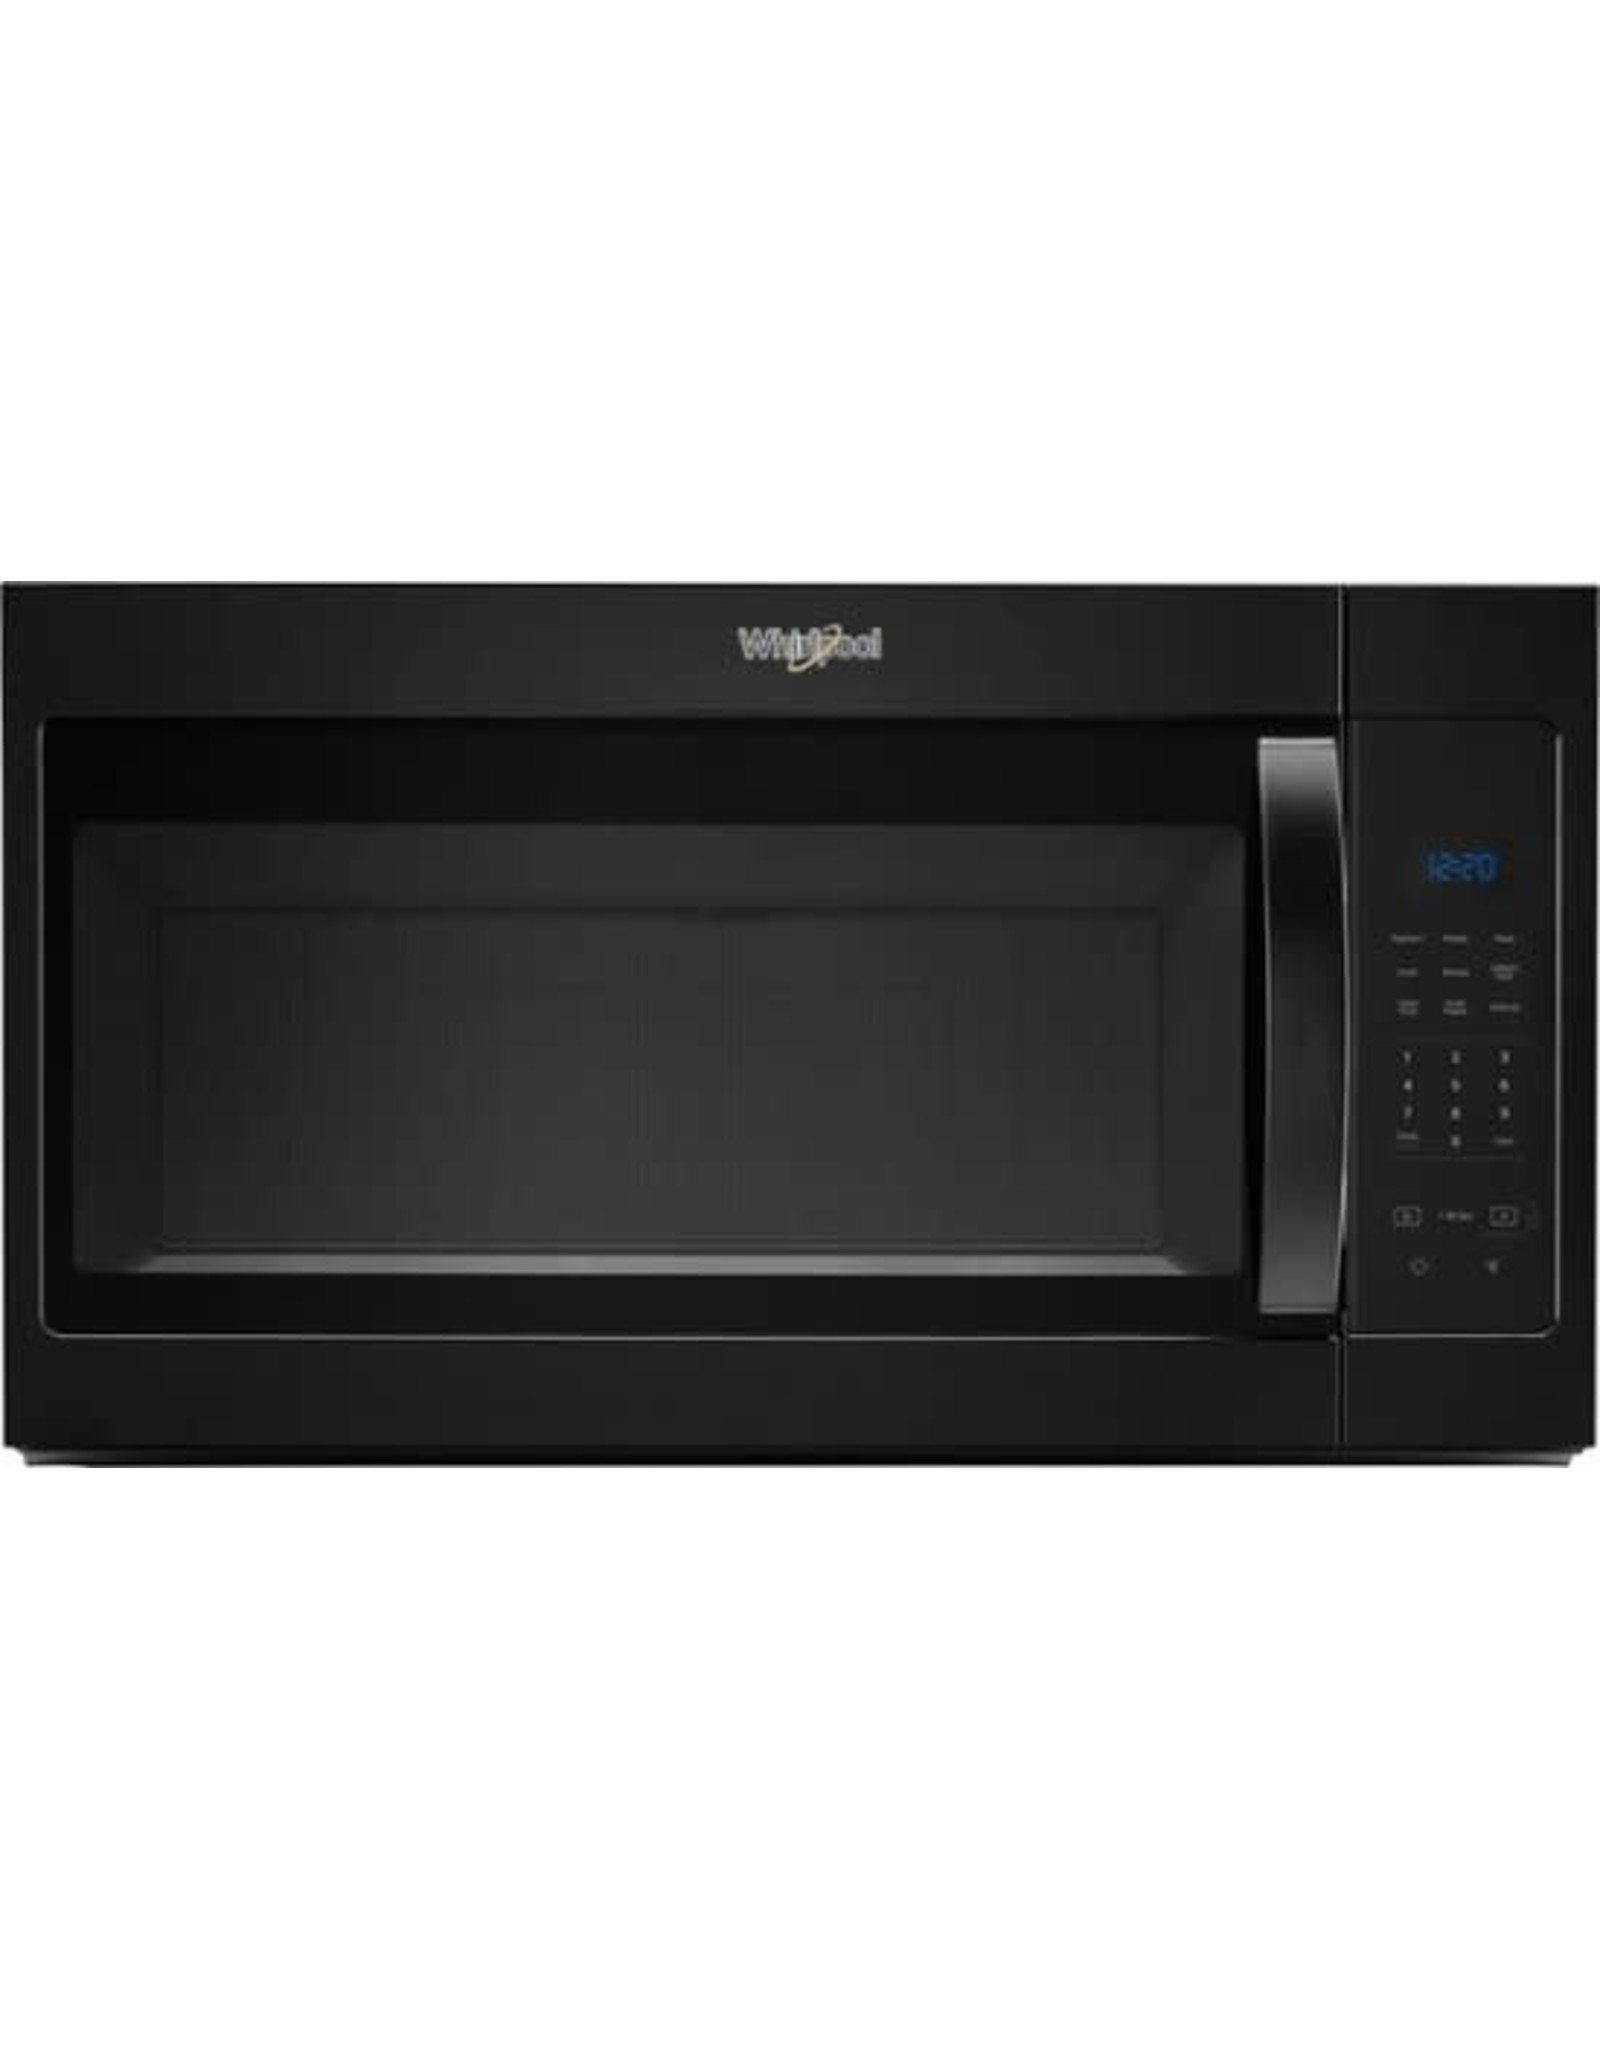 WMH31017HB WHR Microwave, Hood, Combination – 1.7 CU FT, 1000 WATTS, 2-PIECE FRONT, ST